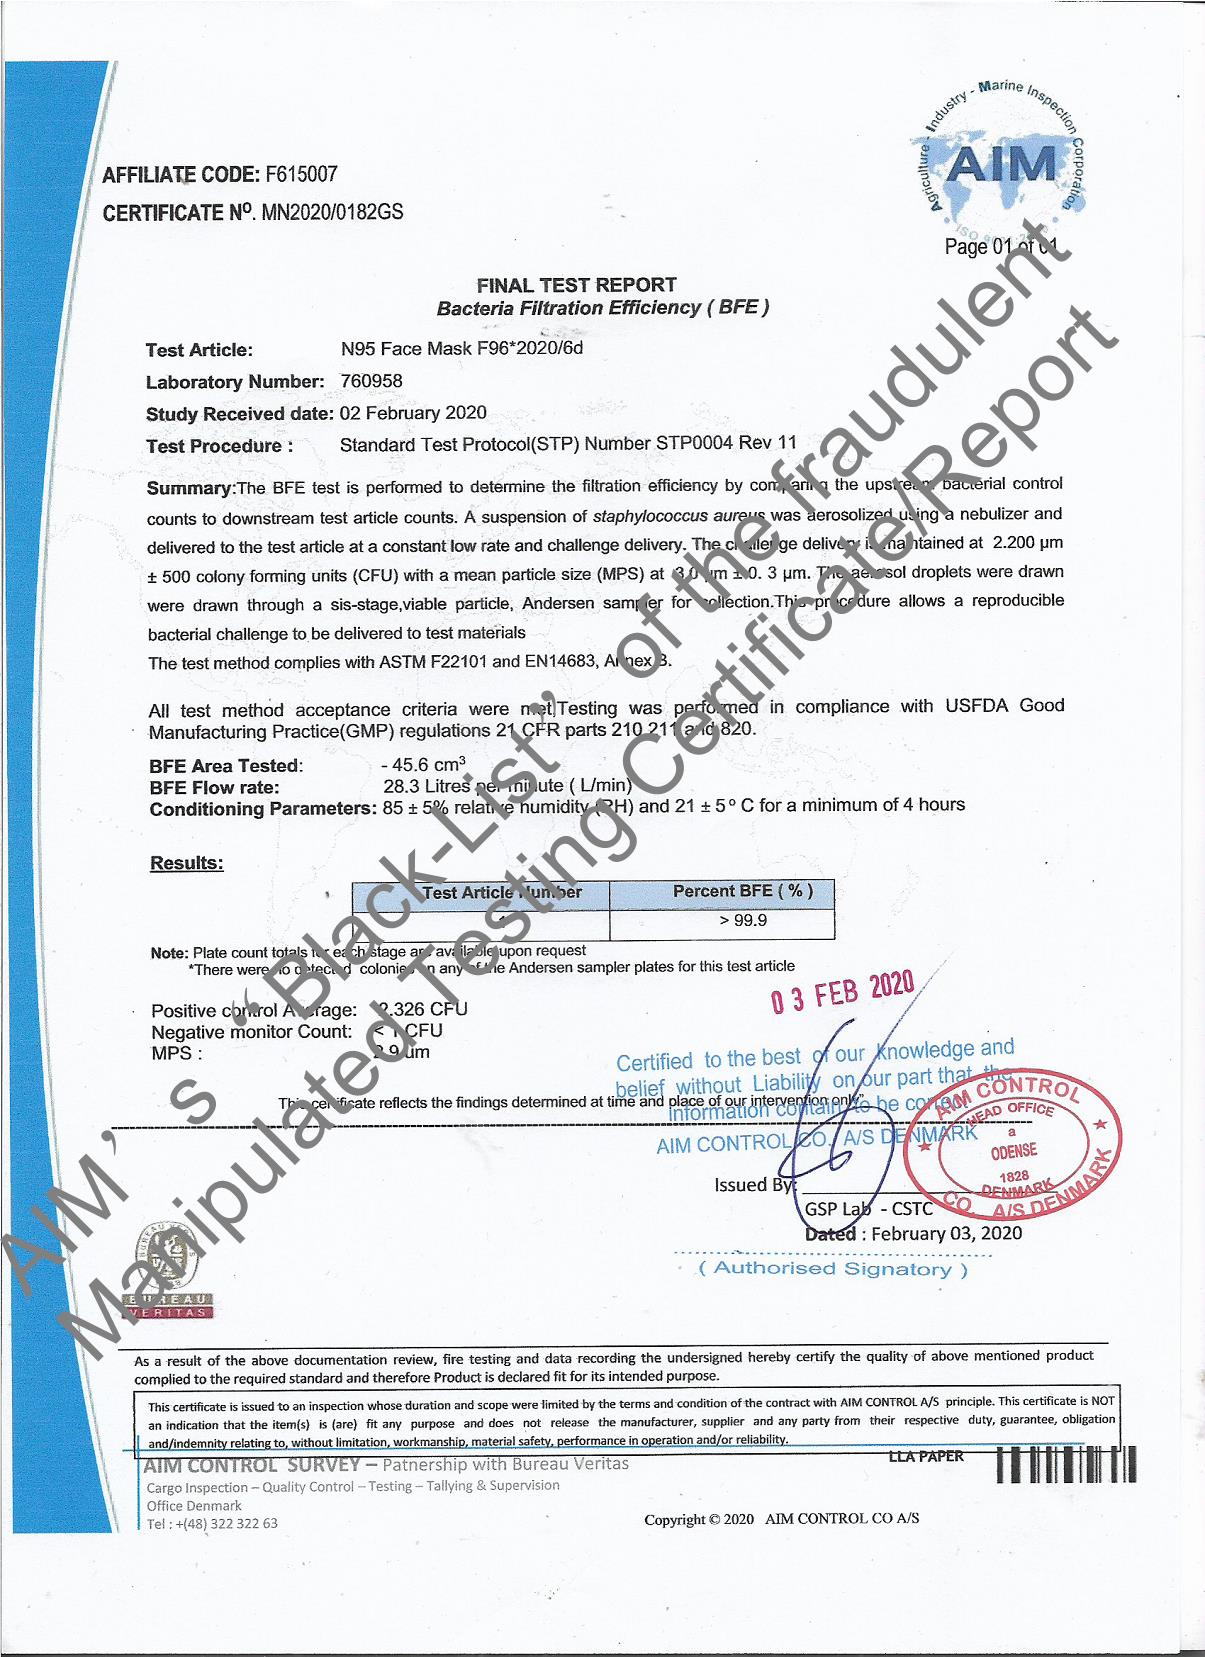 fraudulent_Certificate_from_Thailand_Feb_2020